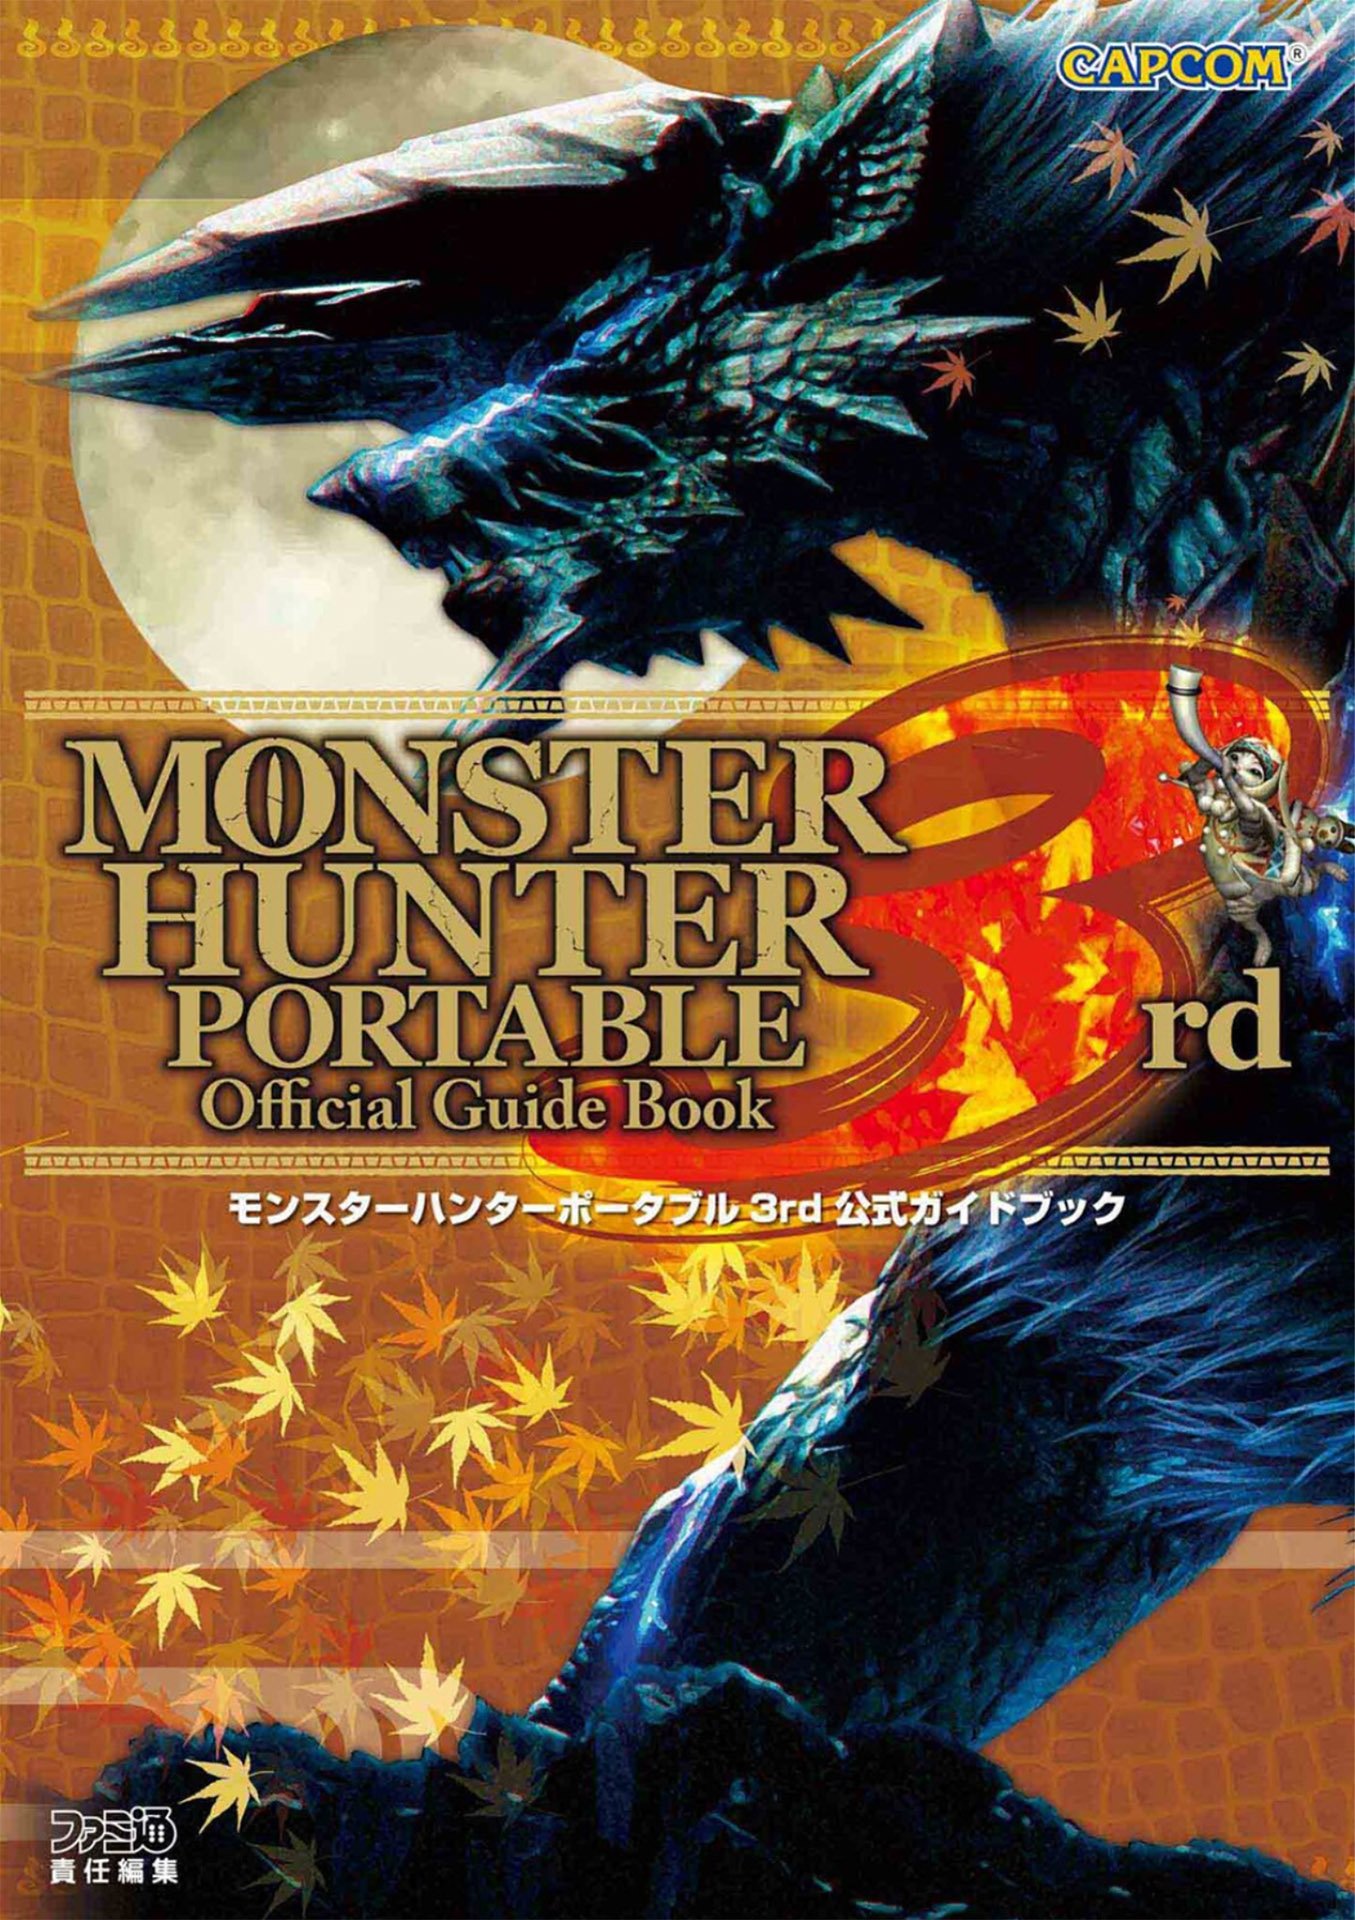 Monster Hunter Freedom Unite, IOS, PSP, Vita, ISO, ROM, Monster List,  Weapons, Wiki, Tips, Cheats, Game Guide Unofficial eBook by Hse Guides -  EPUB Book